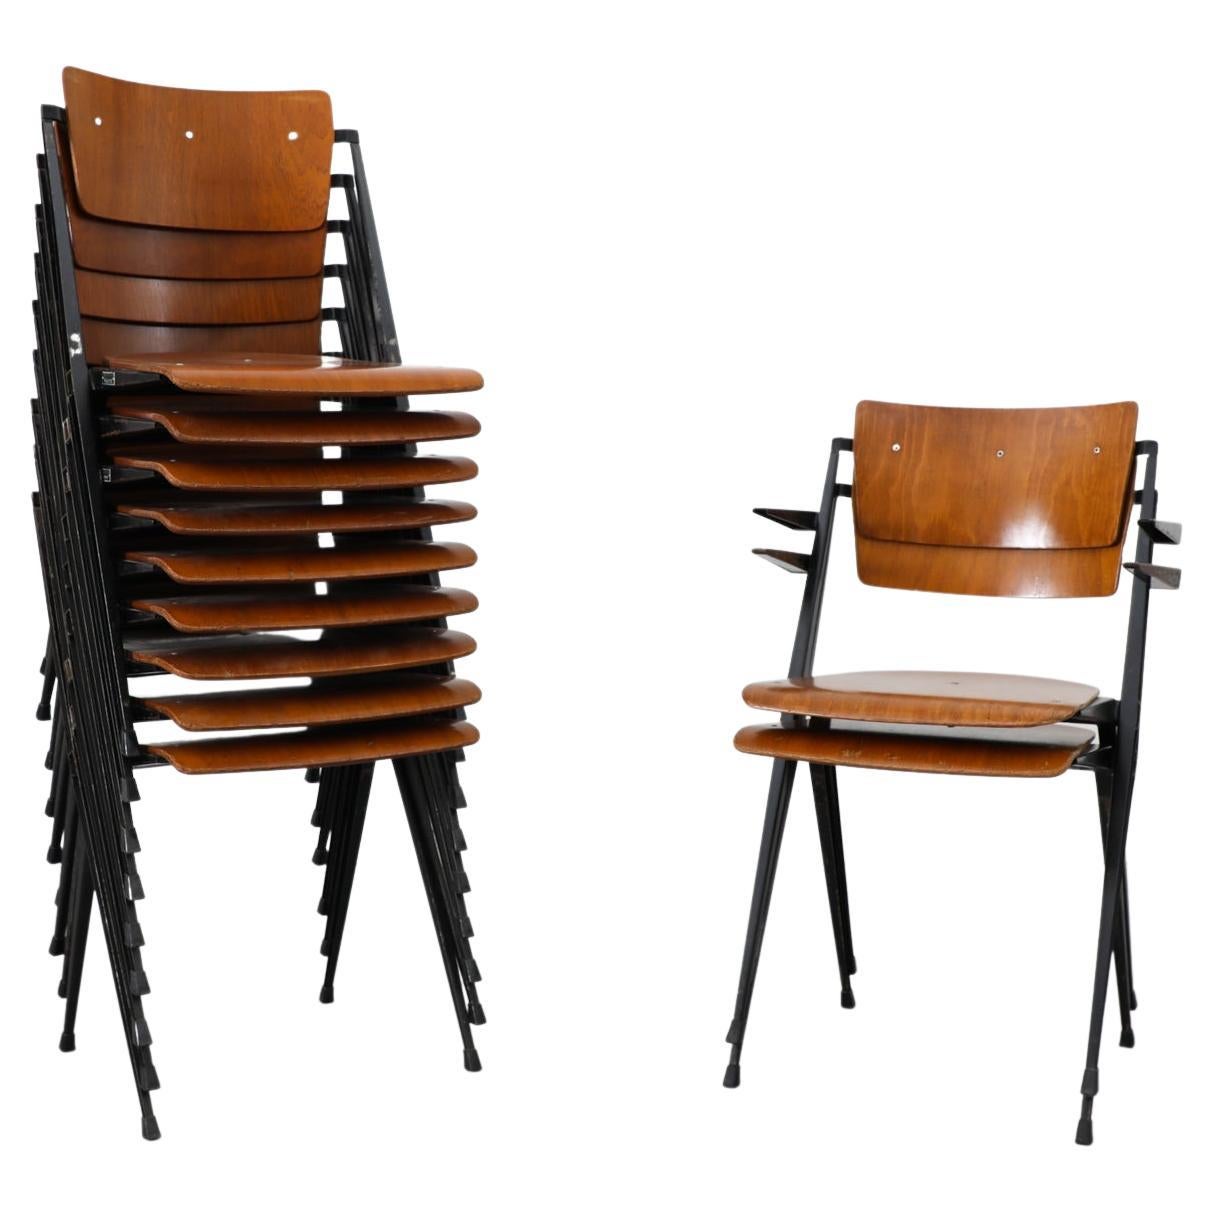 Set of 10 Wim Rietveld Pyramid Stacking Chairs in Teak with Black Enameled Legs